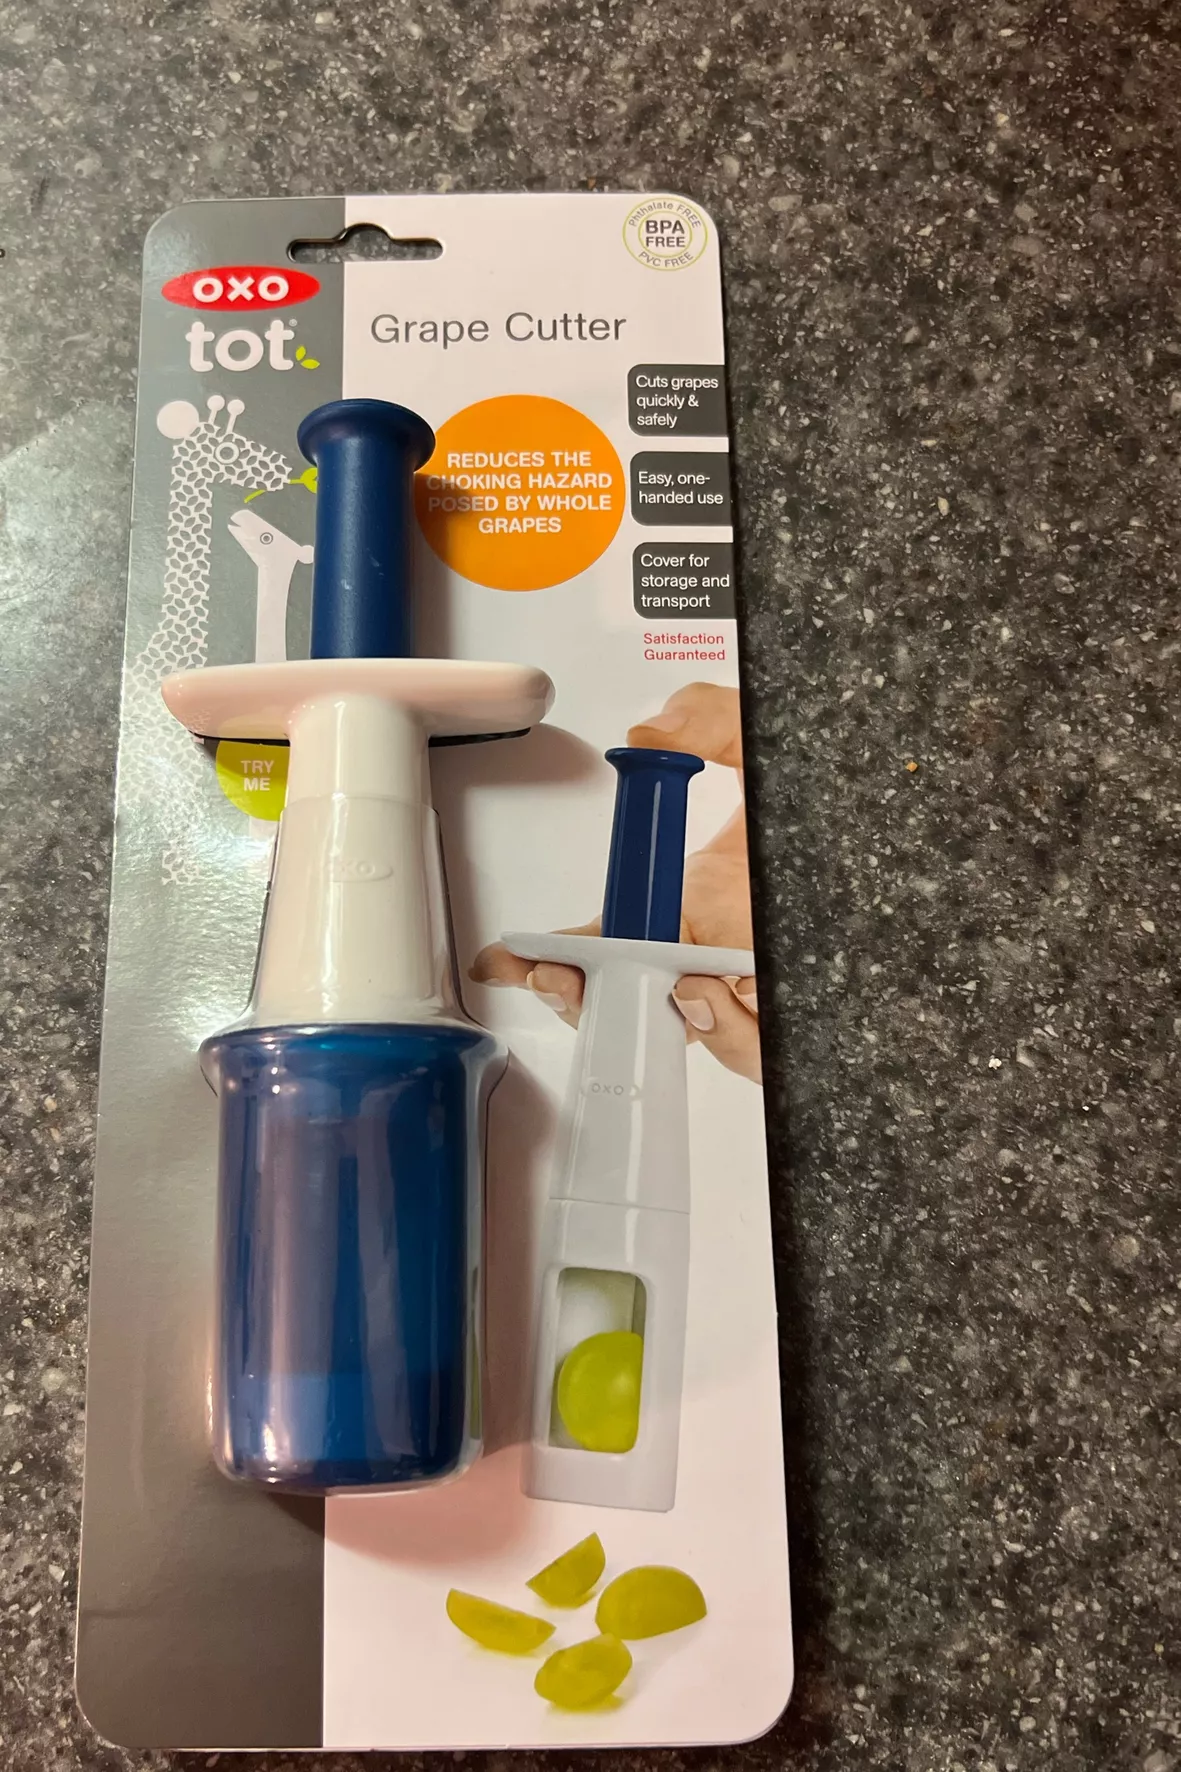 OXO Tot Grape Cutter, Navy curated on LTK